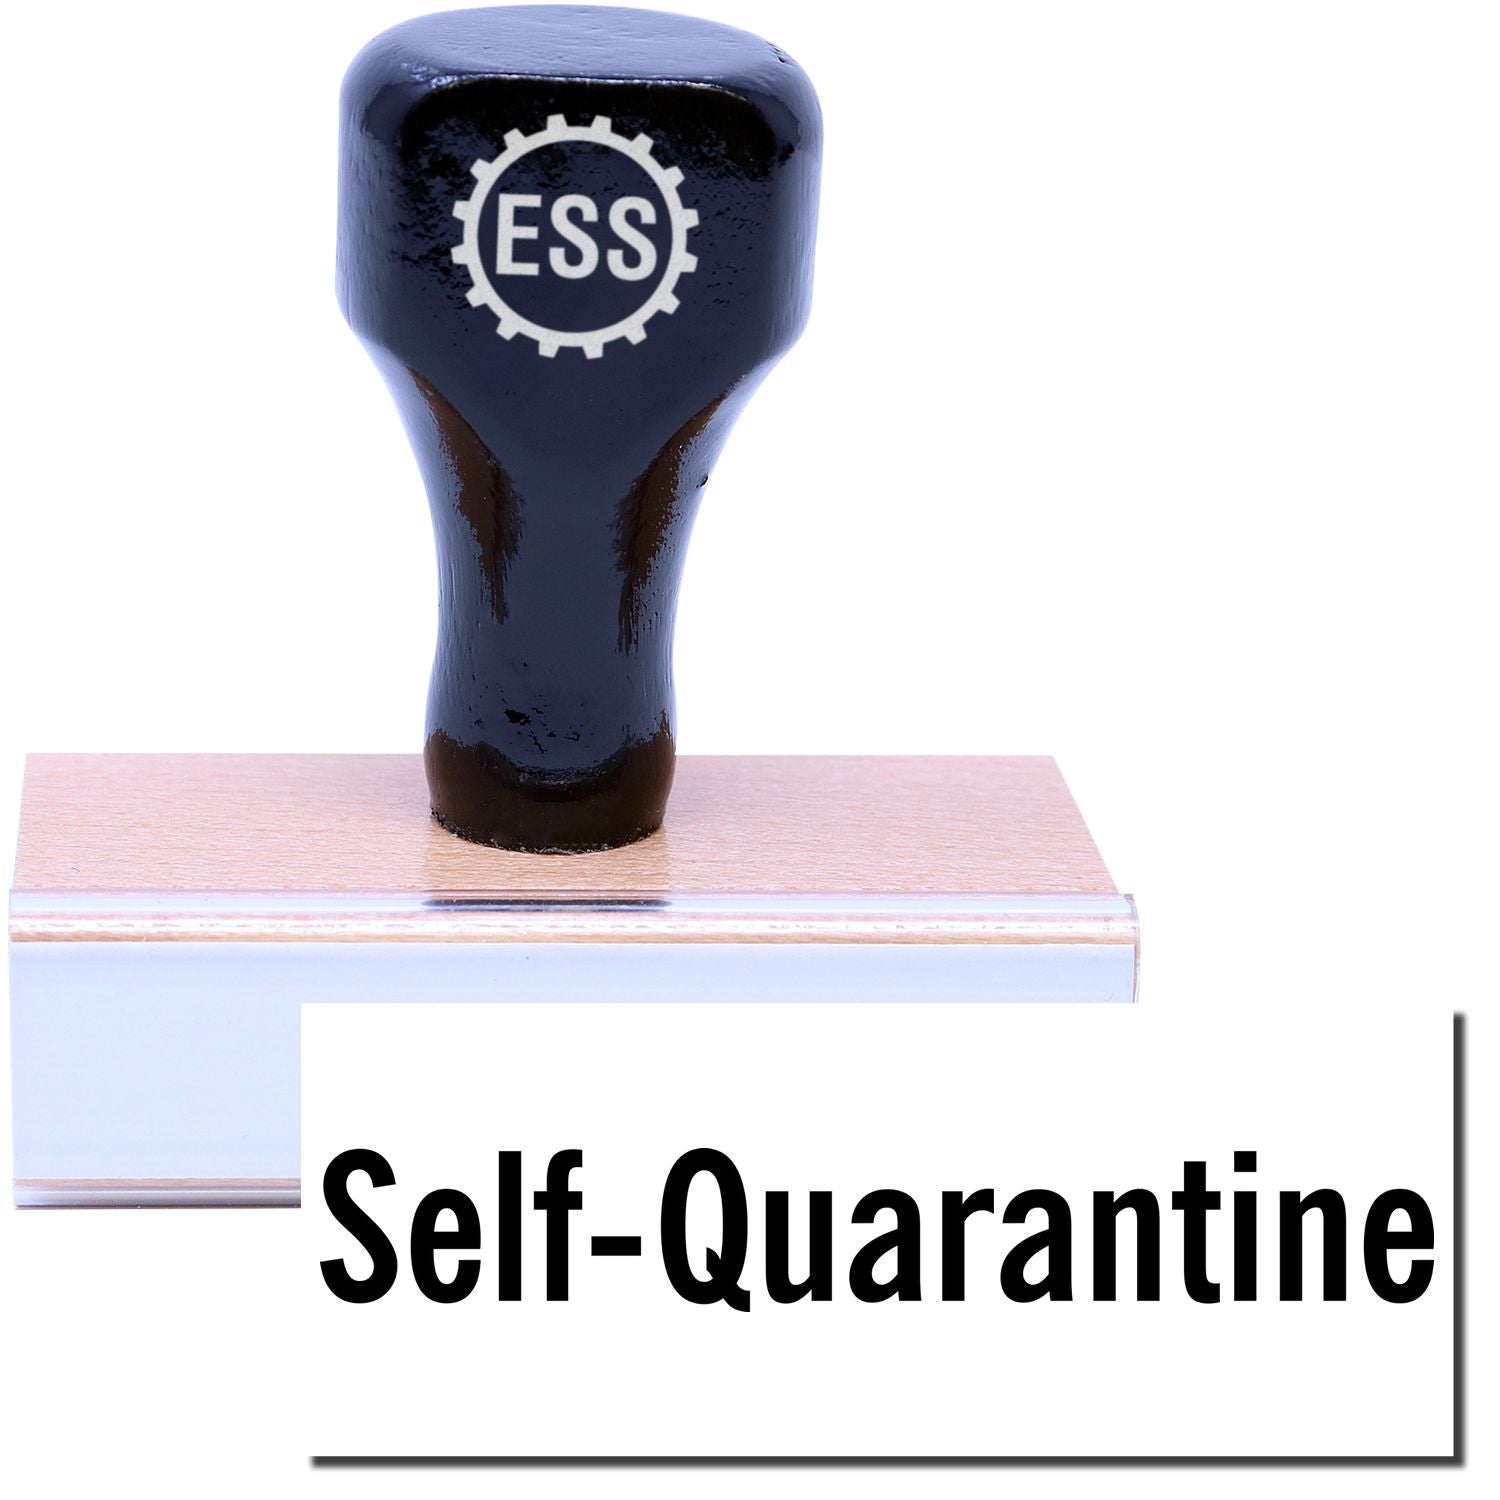 A stock office rubber stamp with a stamped image showing how the text "Self-Quarantine" in a large font is displayed after stamping.